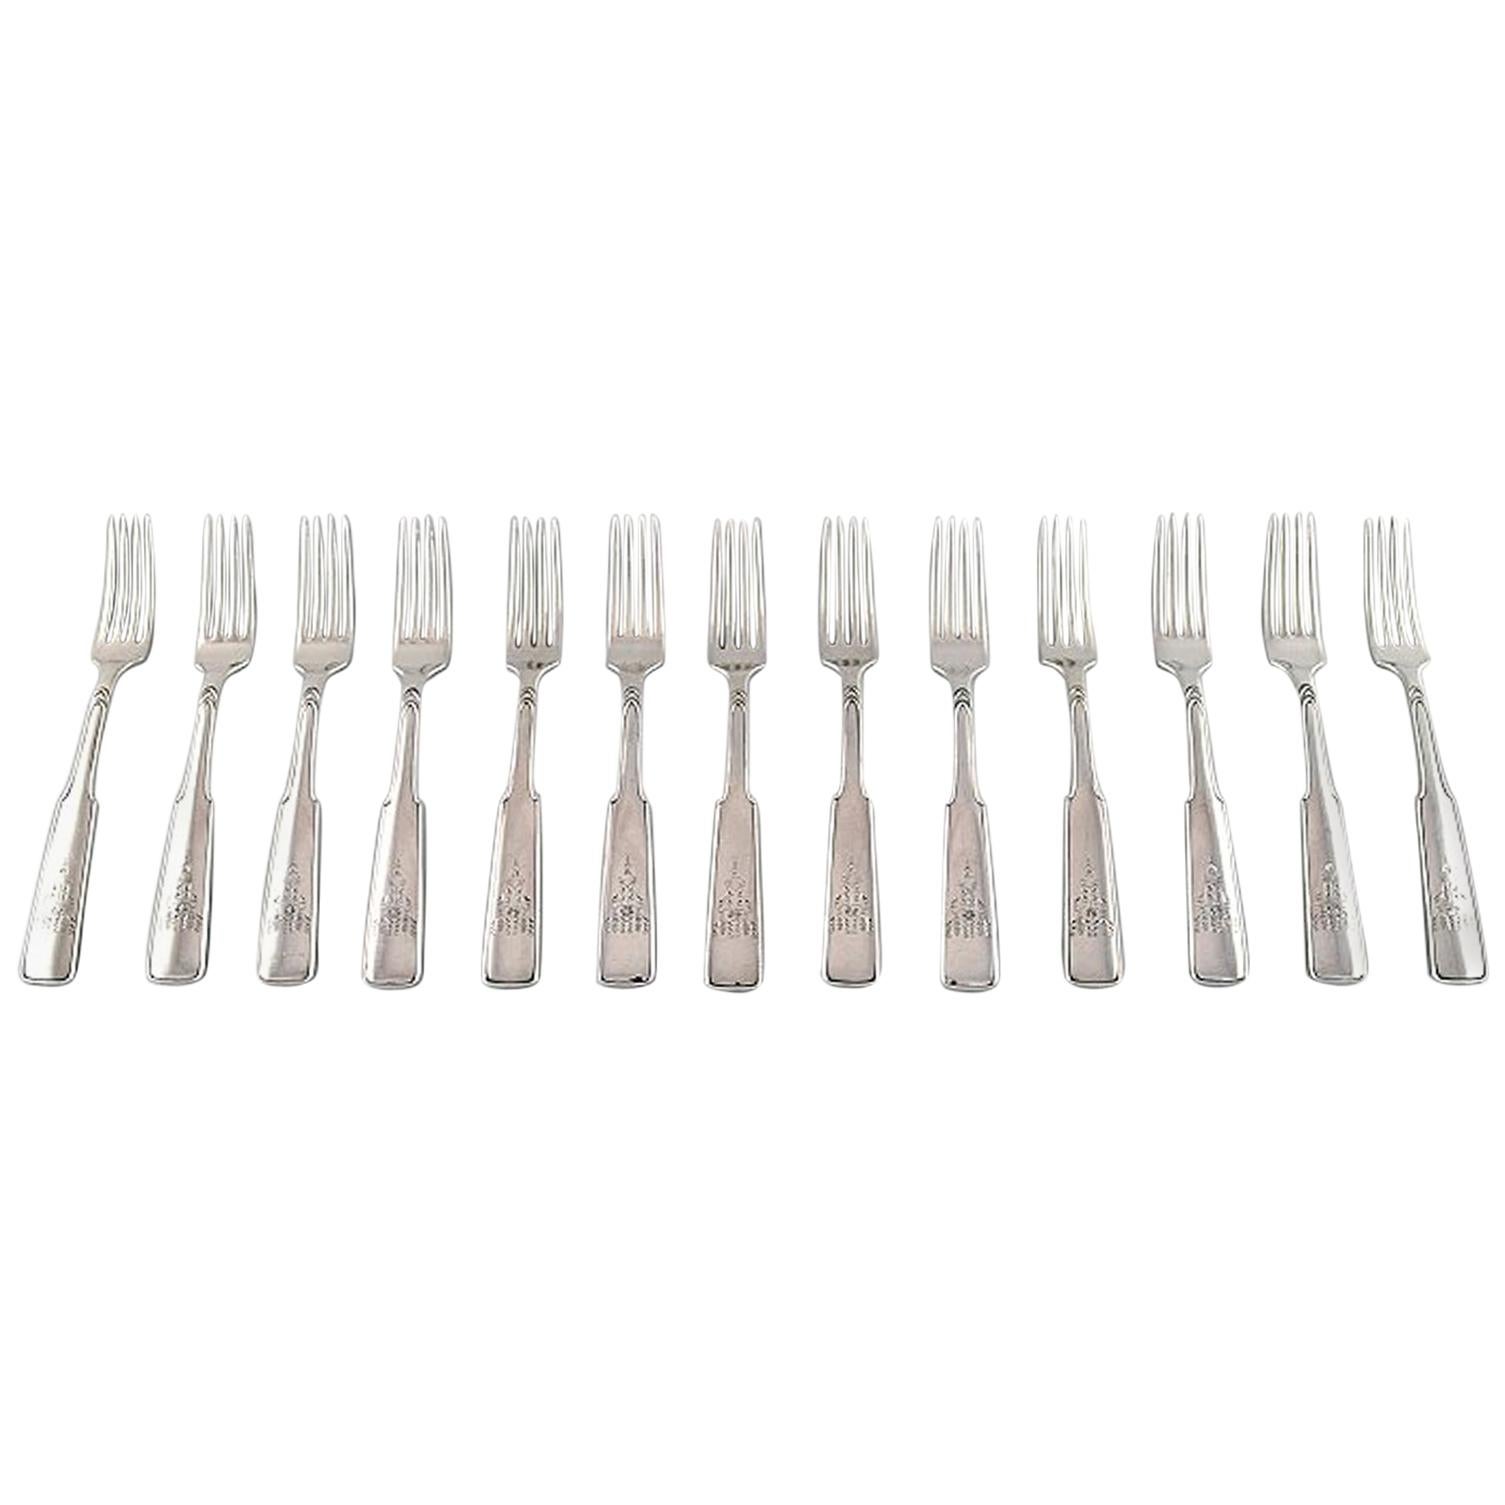 Hans Hansen Silverware Number 2, Set of 13 Lunch Forks in All Silver